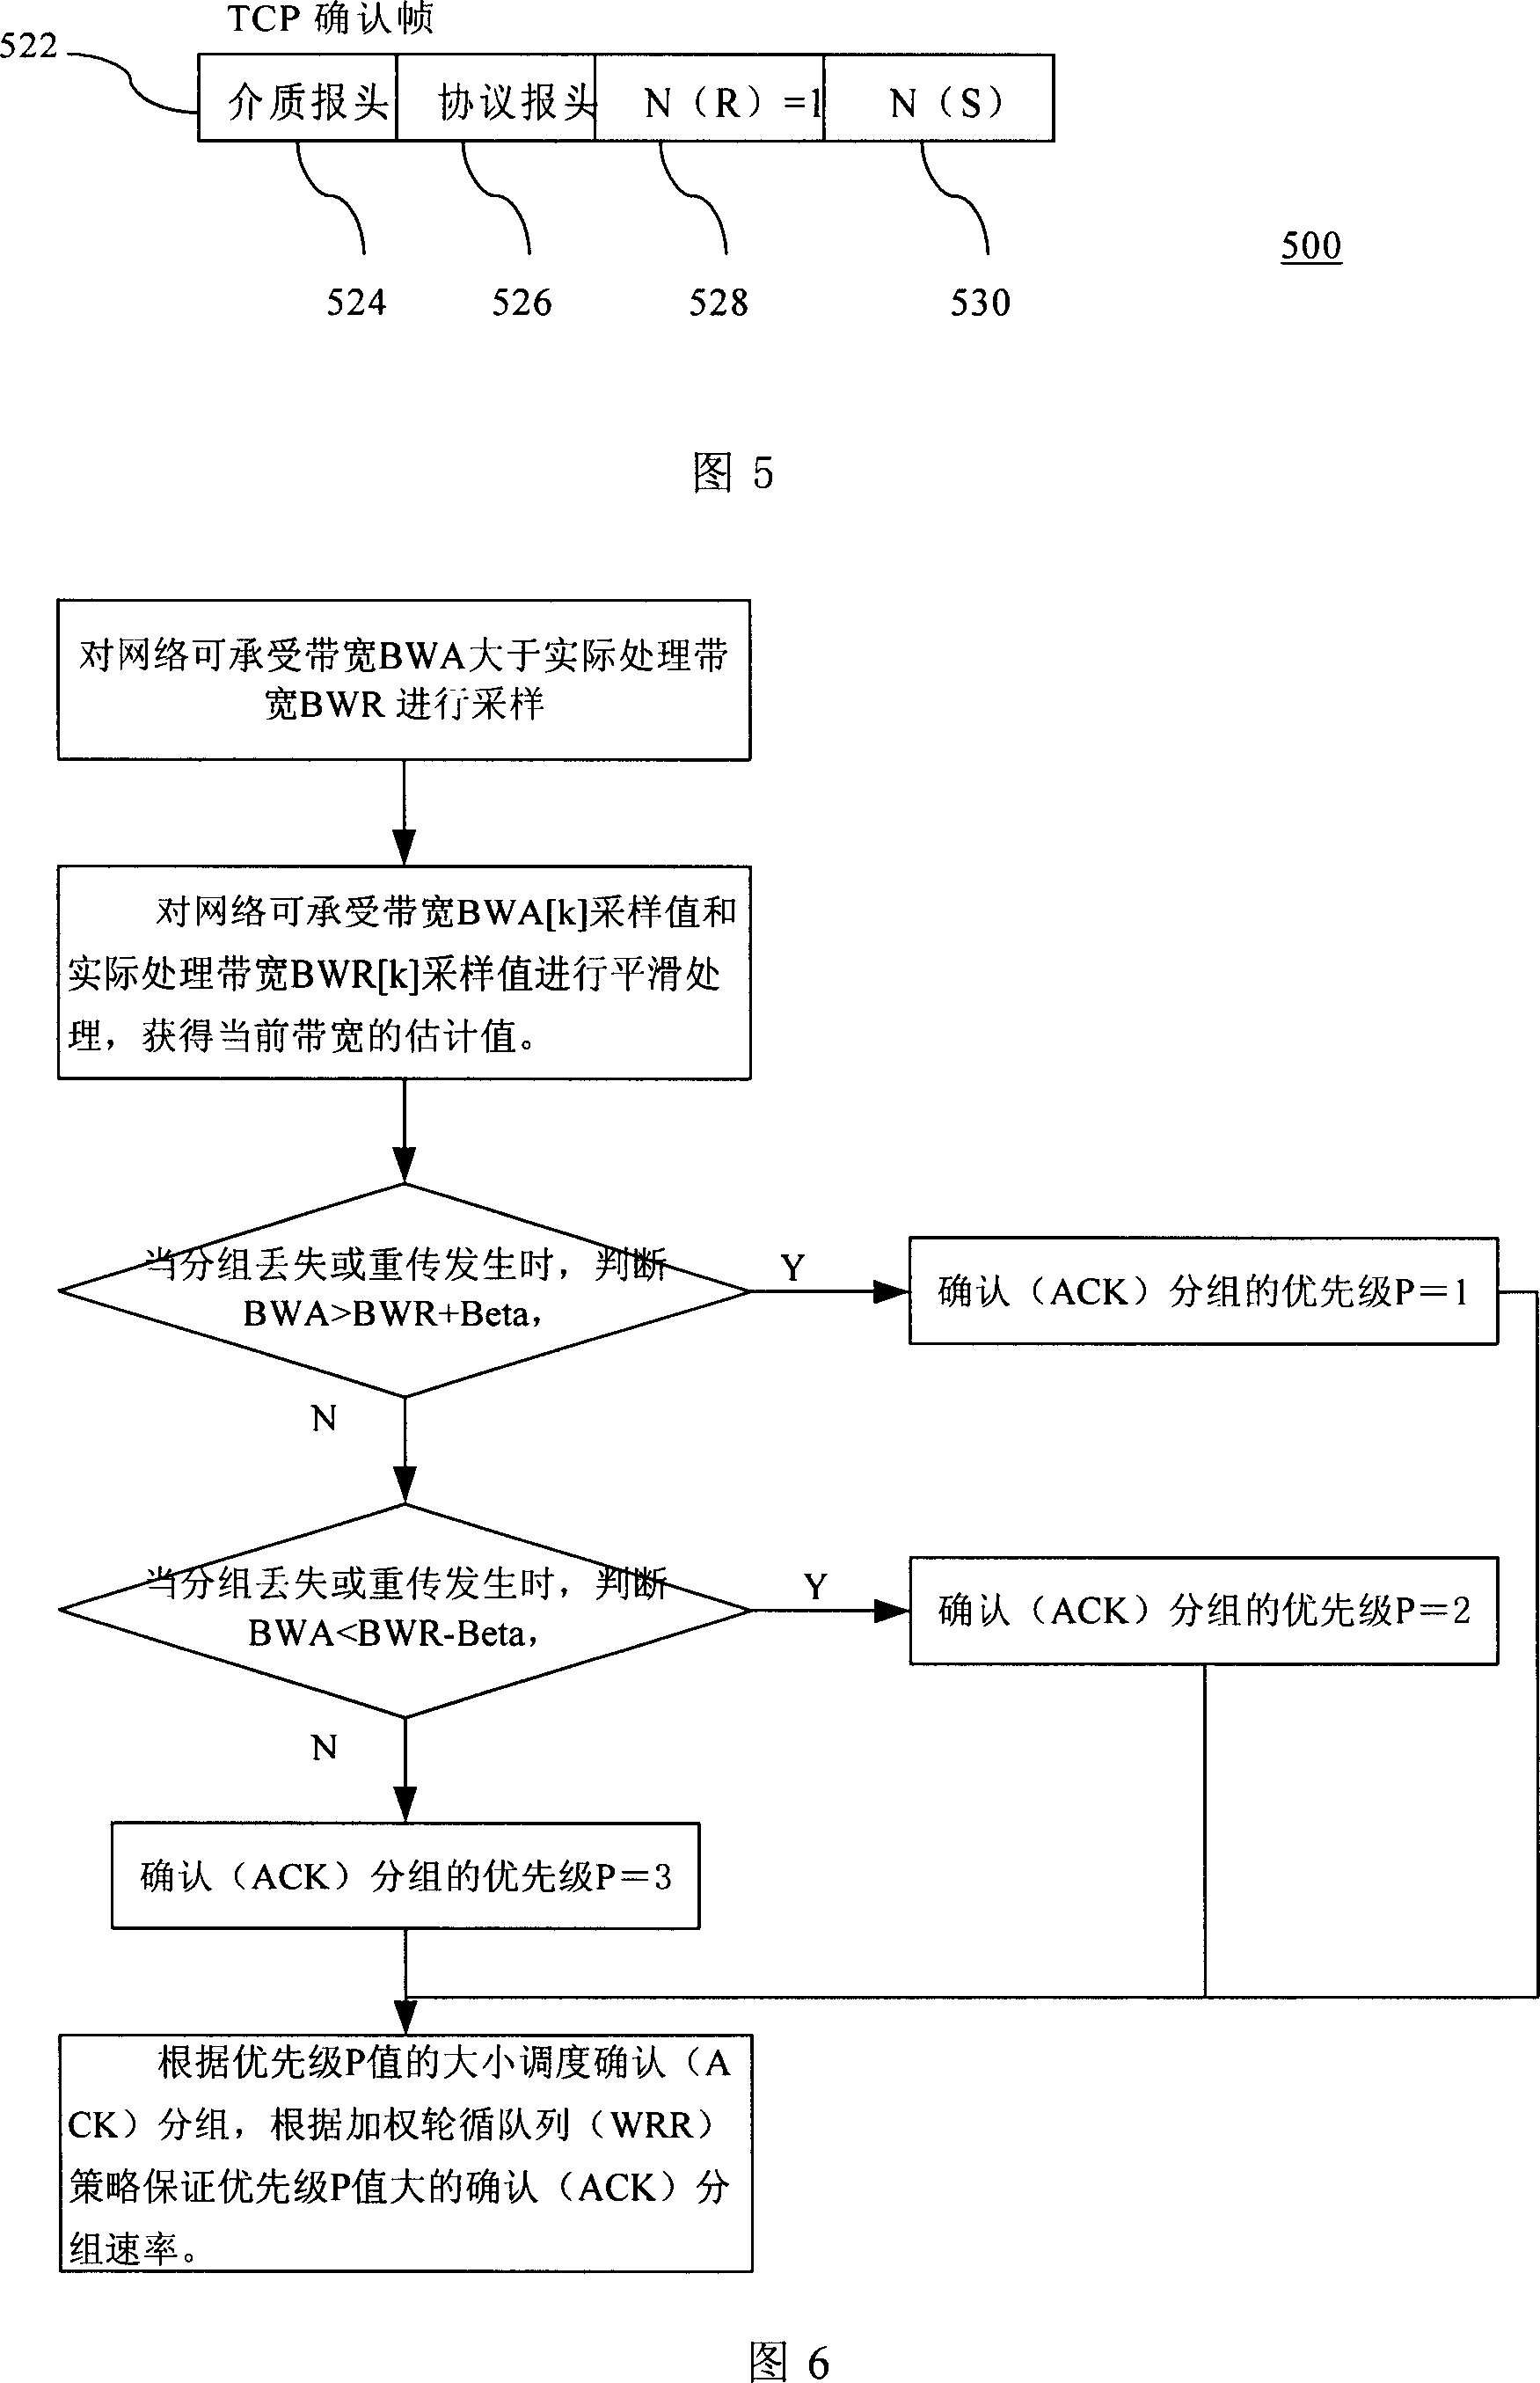 Accelerating method for asymmetric and multi-concurrency network